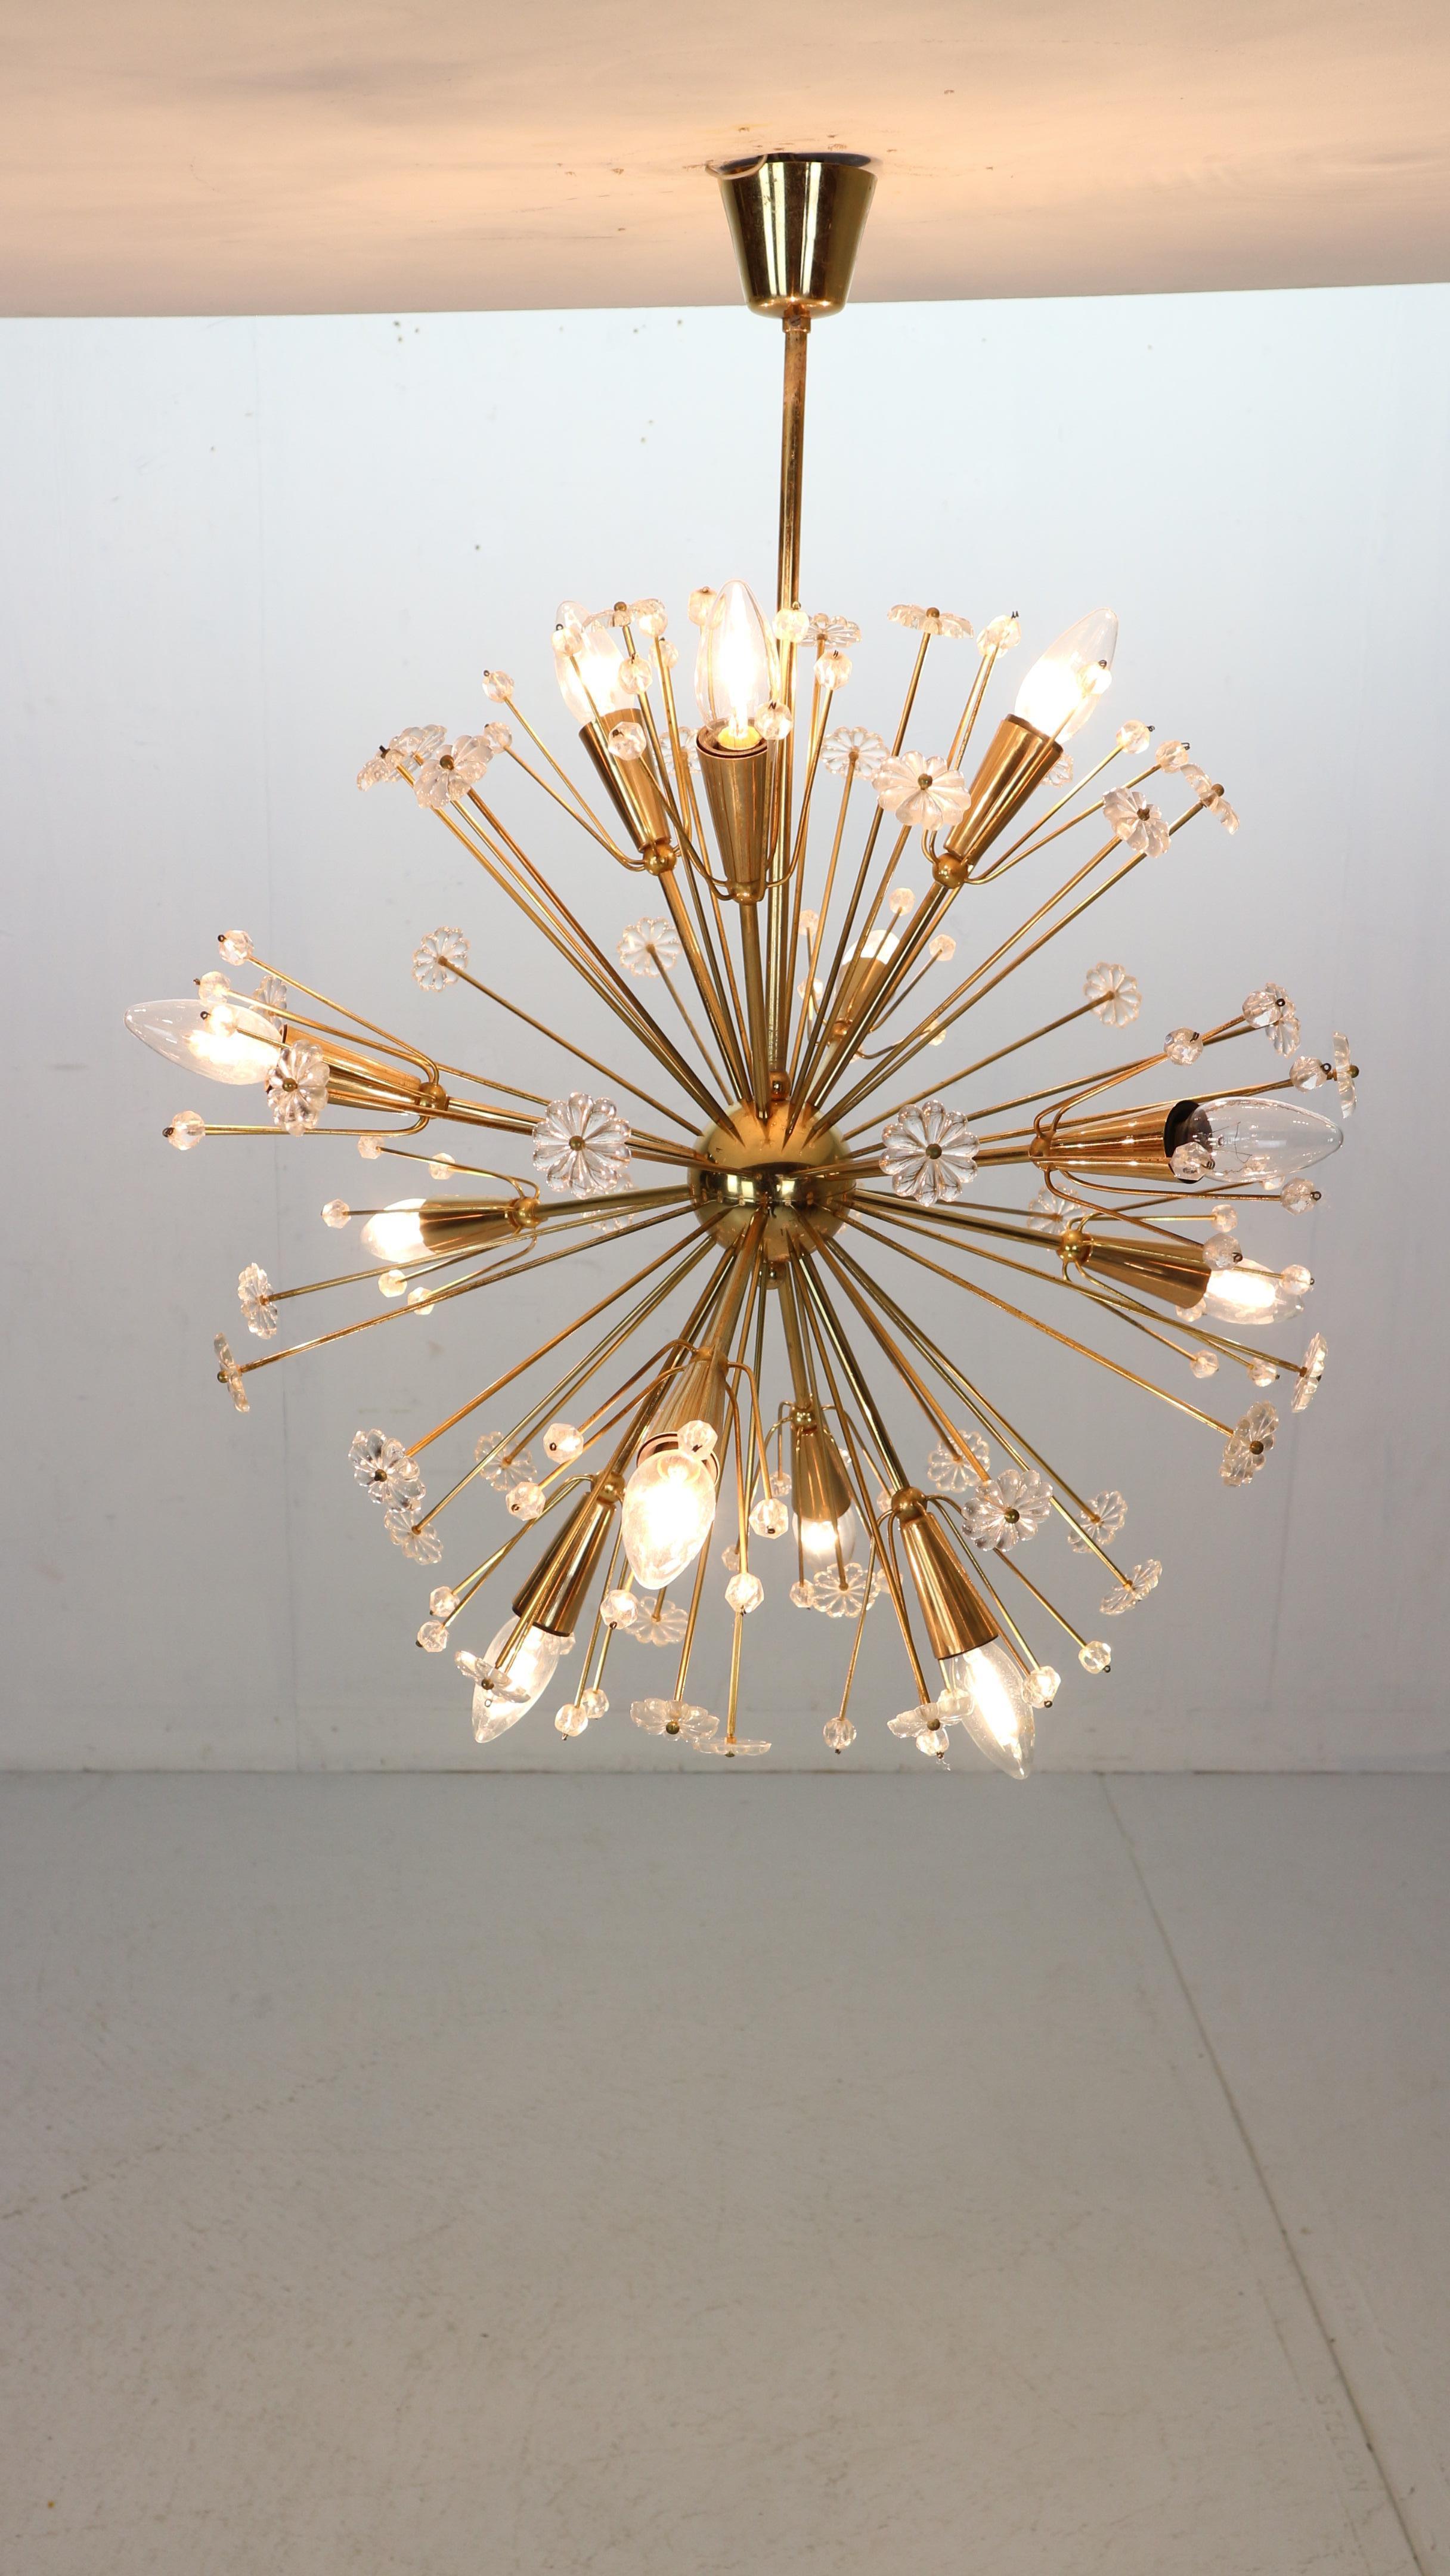 Space Age era snowflake Sputnik chandelier designed by Emil Stejnar for Rupert Nikoll, Vienna, Austria made in the 1950 period. 
Made of brass, fully covered with Austrian crystal balls and glass flowers. 
Beautiful design for a great light